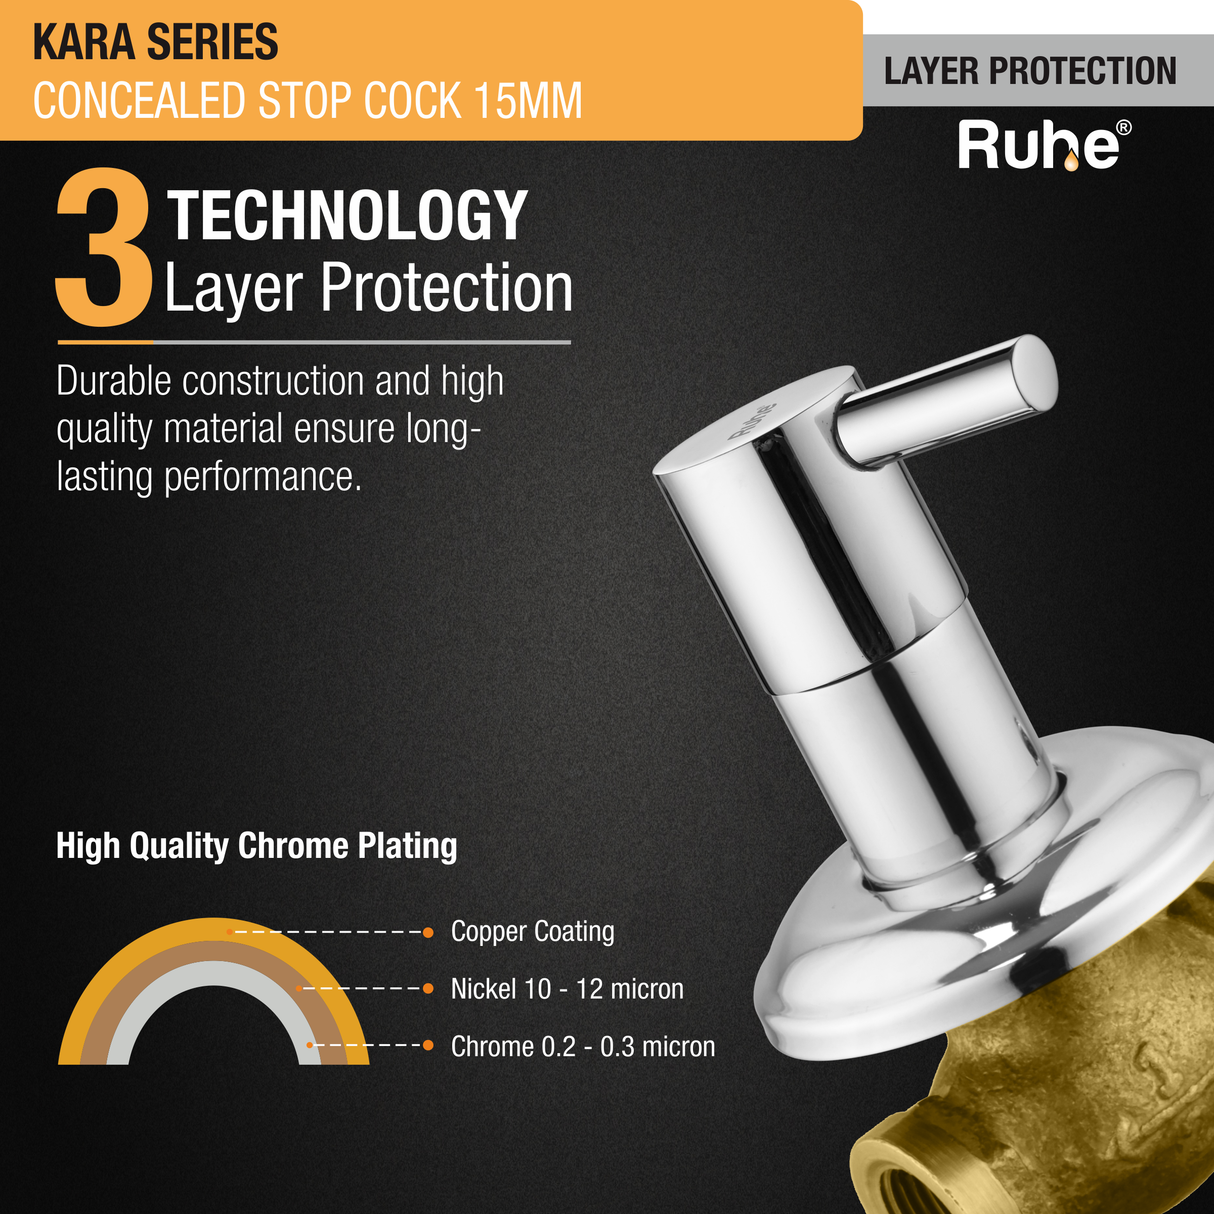 Kara Concealed Stop Valve Brass Faucet (15mm) 3 layer protection